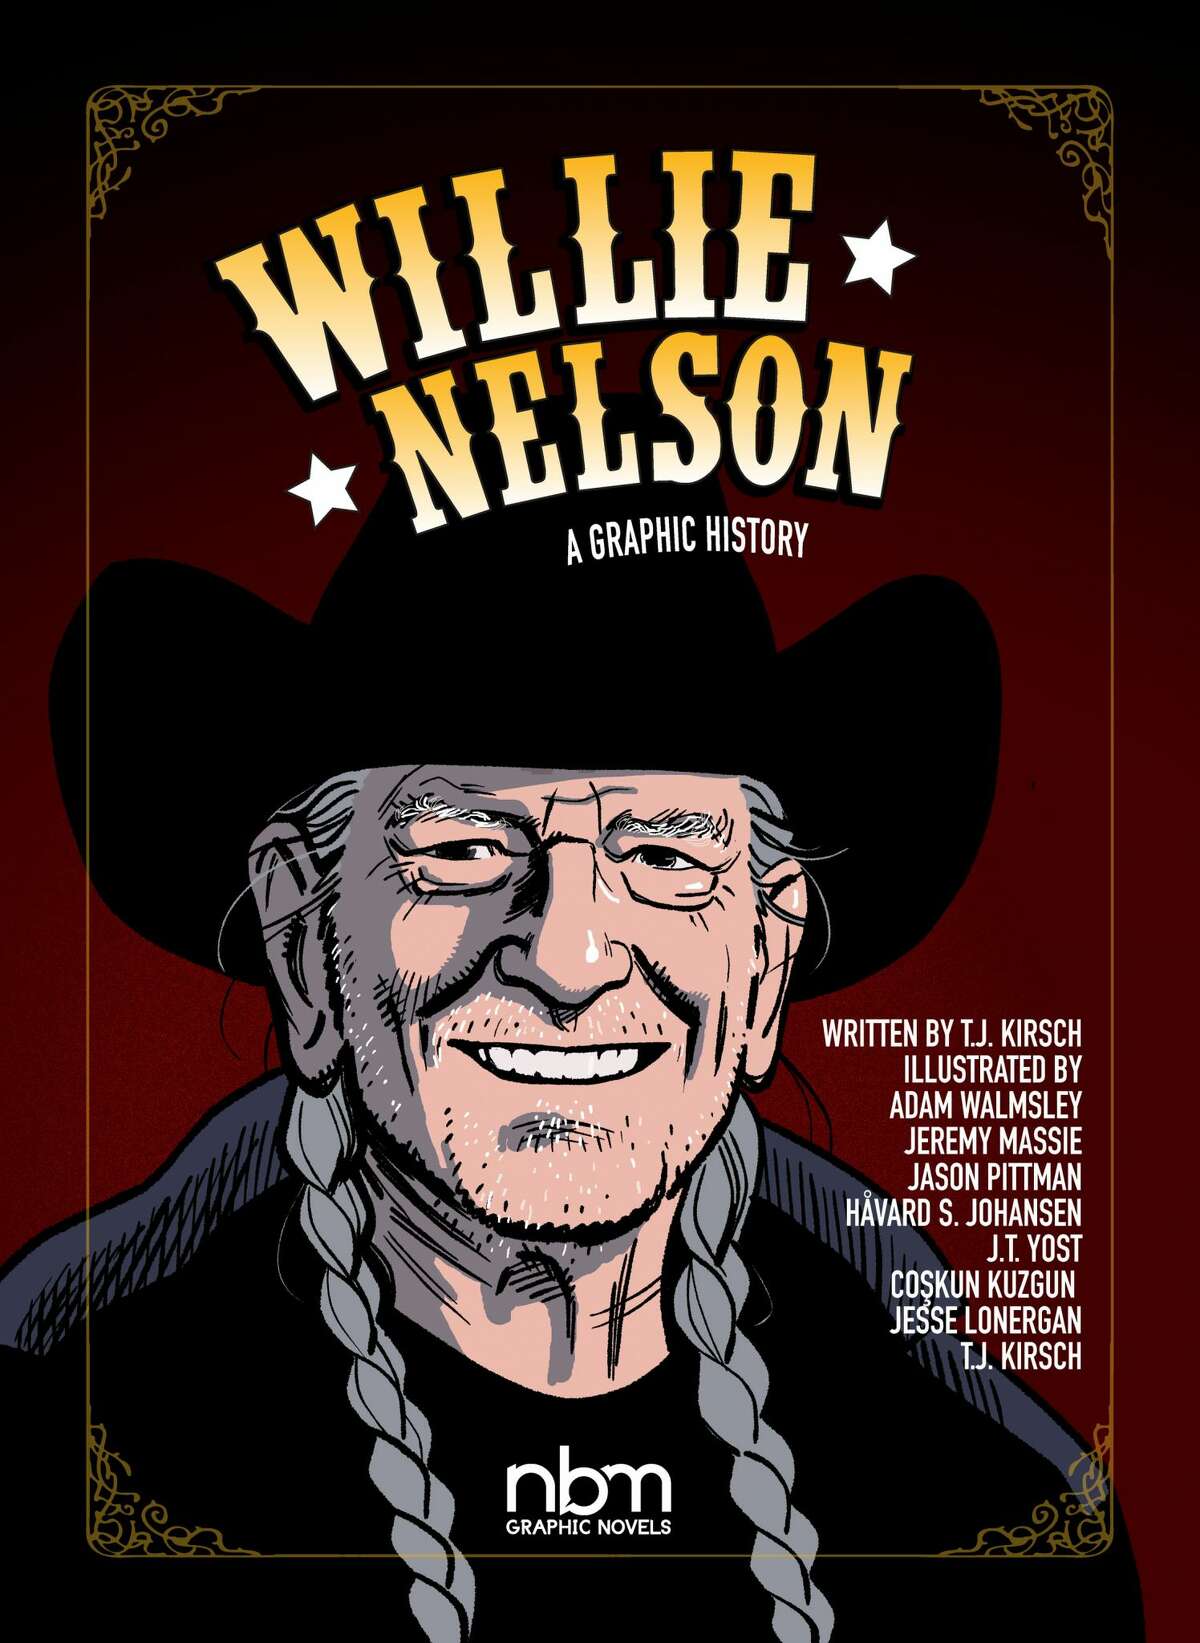 TJ Kirsch, of East Greenbush, authored a graphic novel on Willie Nelson.